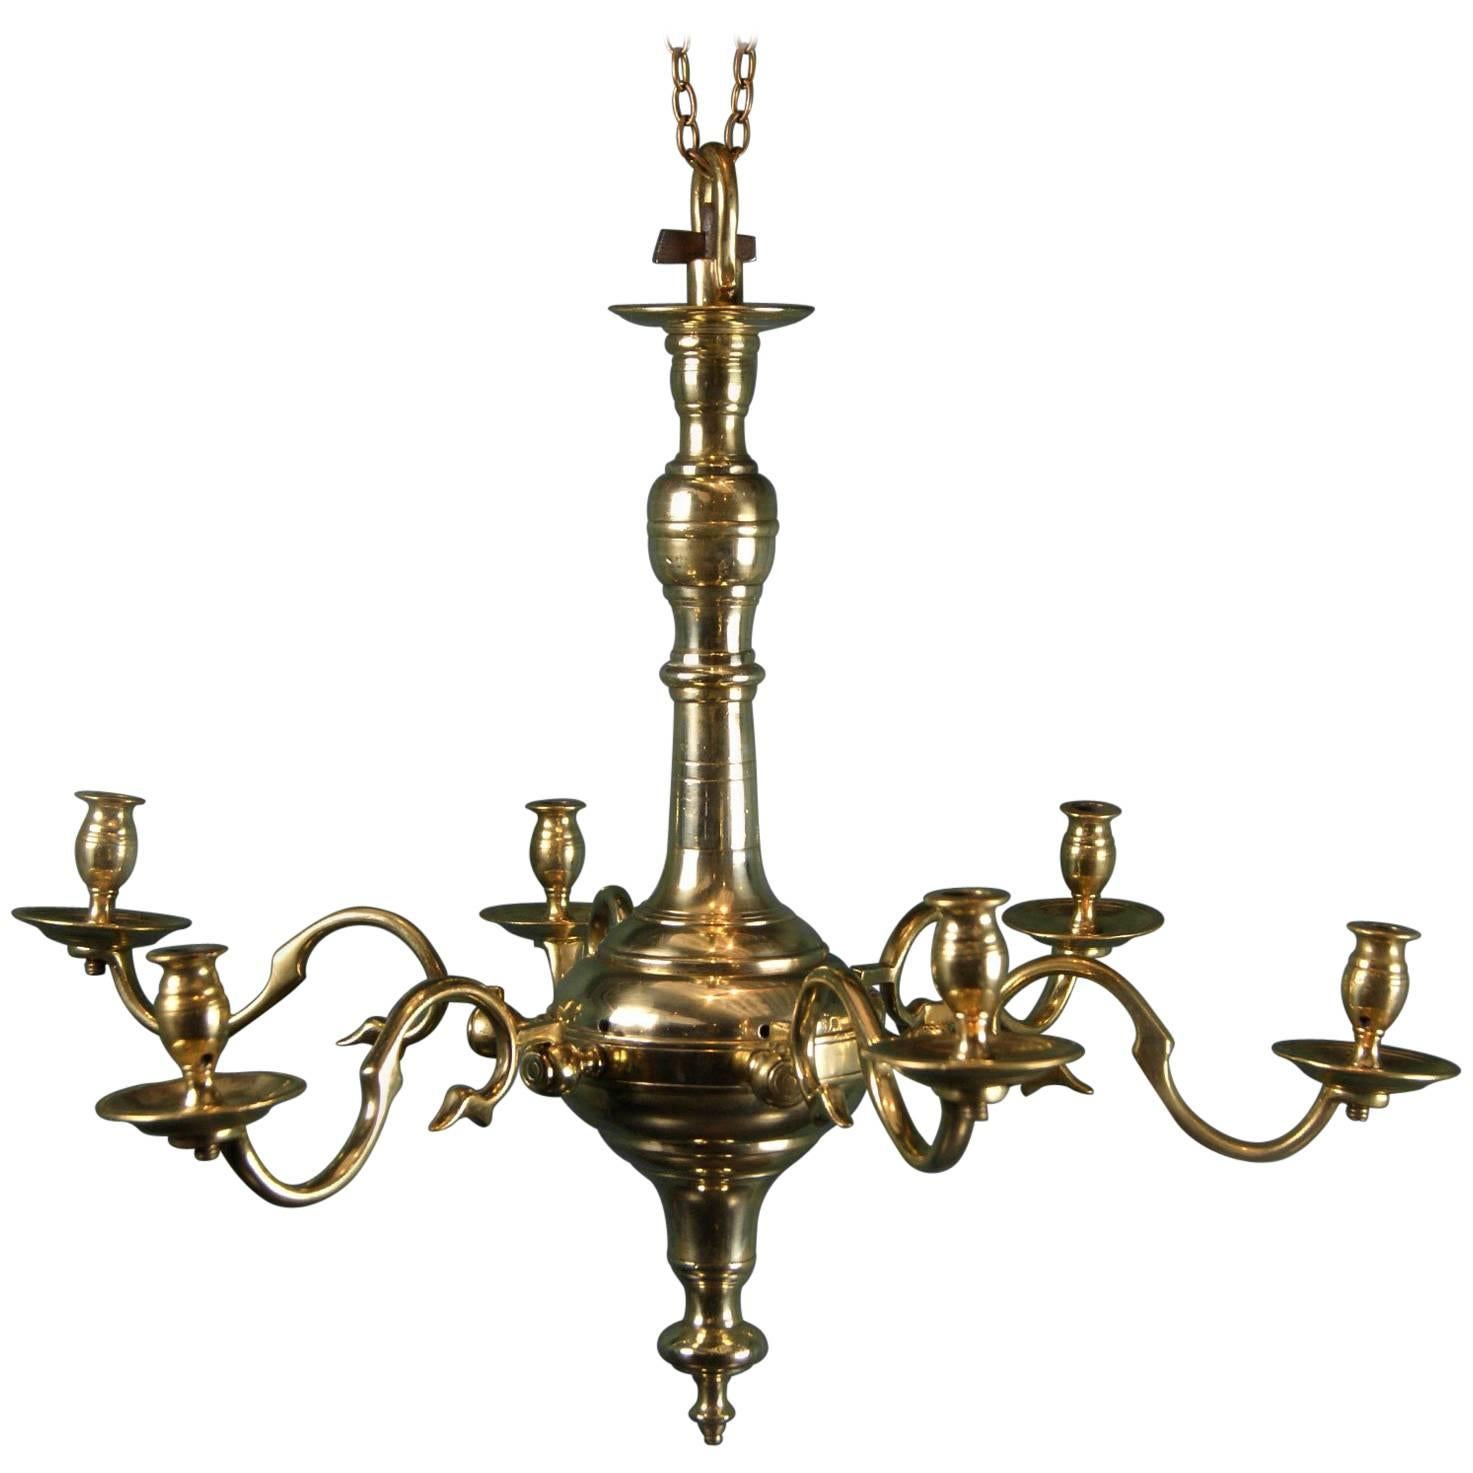 English Mid-18th Century Brass Chandelier For Sale